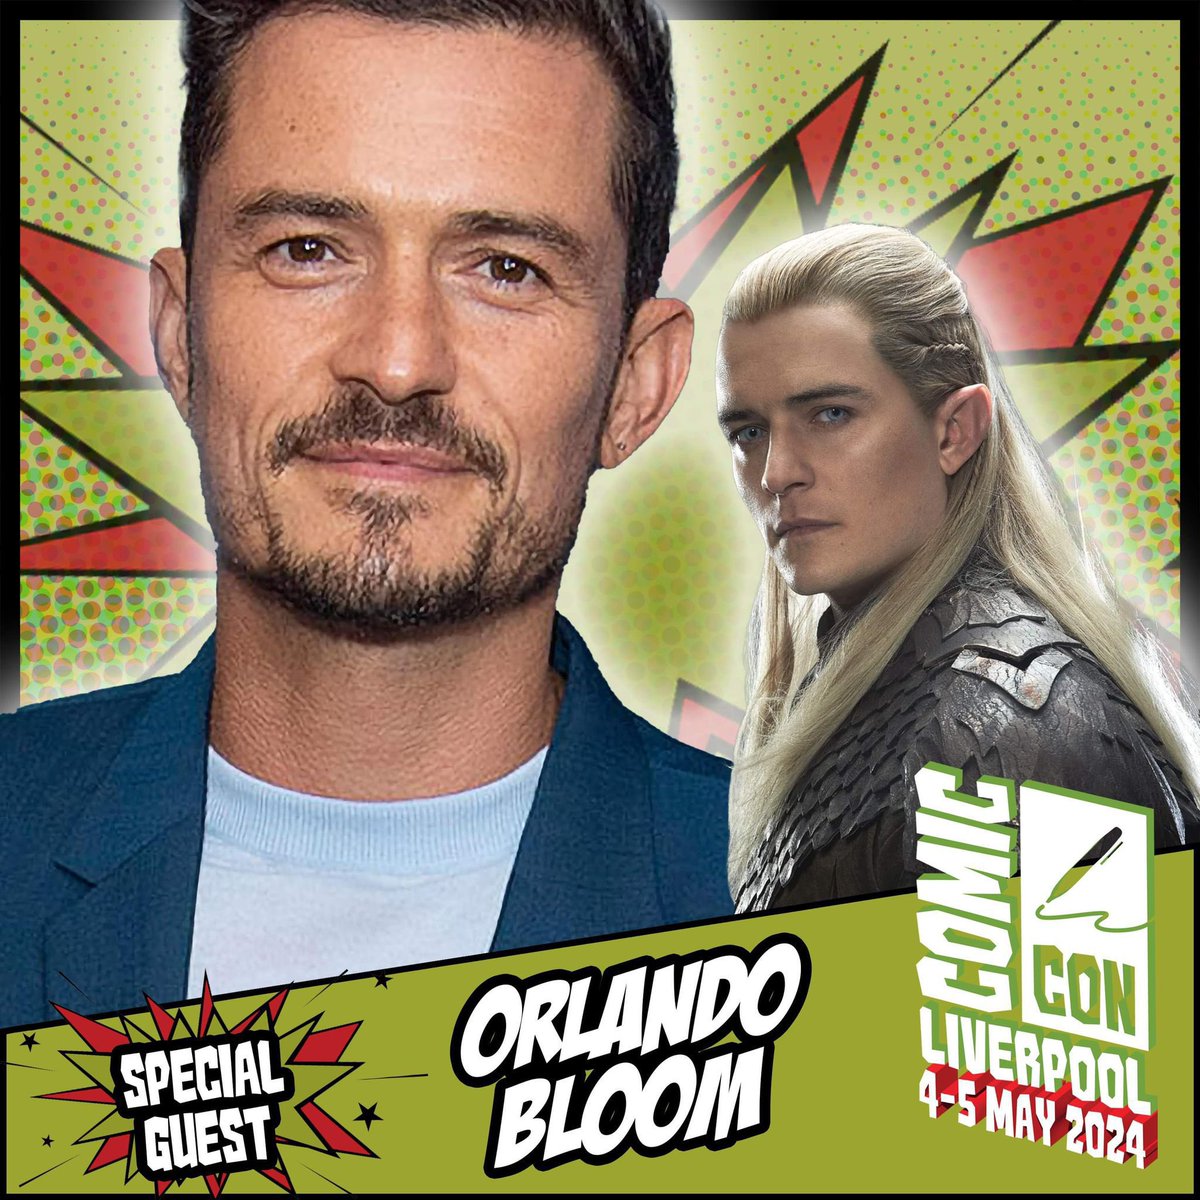 🚨 TICKET ALERT 🚨 We have now gone on sale with a limited amount of Saturday photographs and Sunday autographs for Orlando Bloom! We expect these to sell out extremely fast so secure yours whilst you can. Tickets: comicconventionliverpool.co.uk